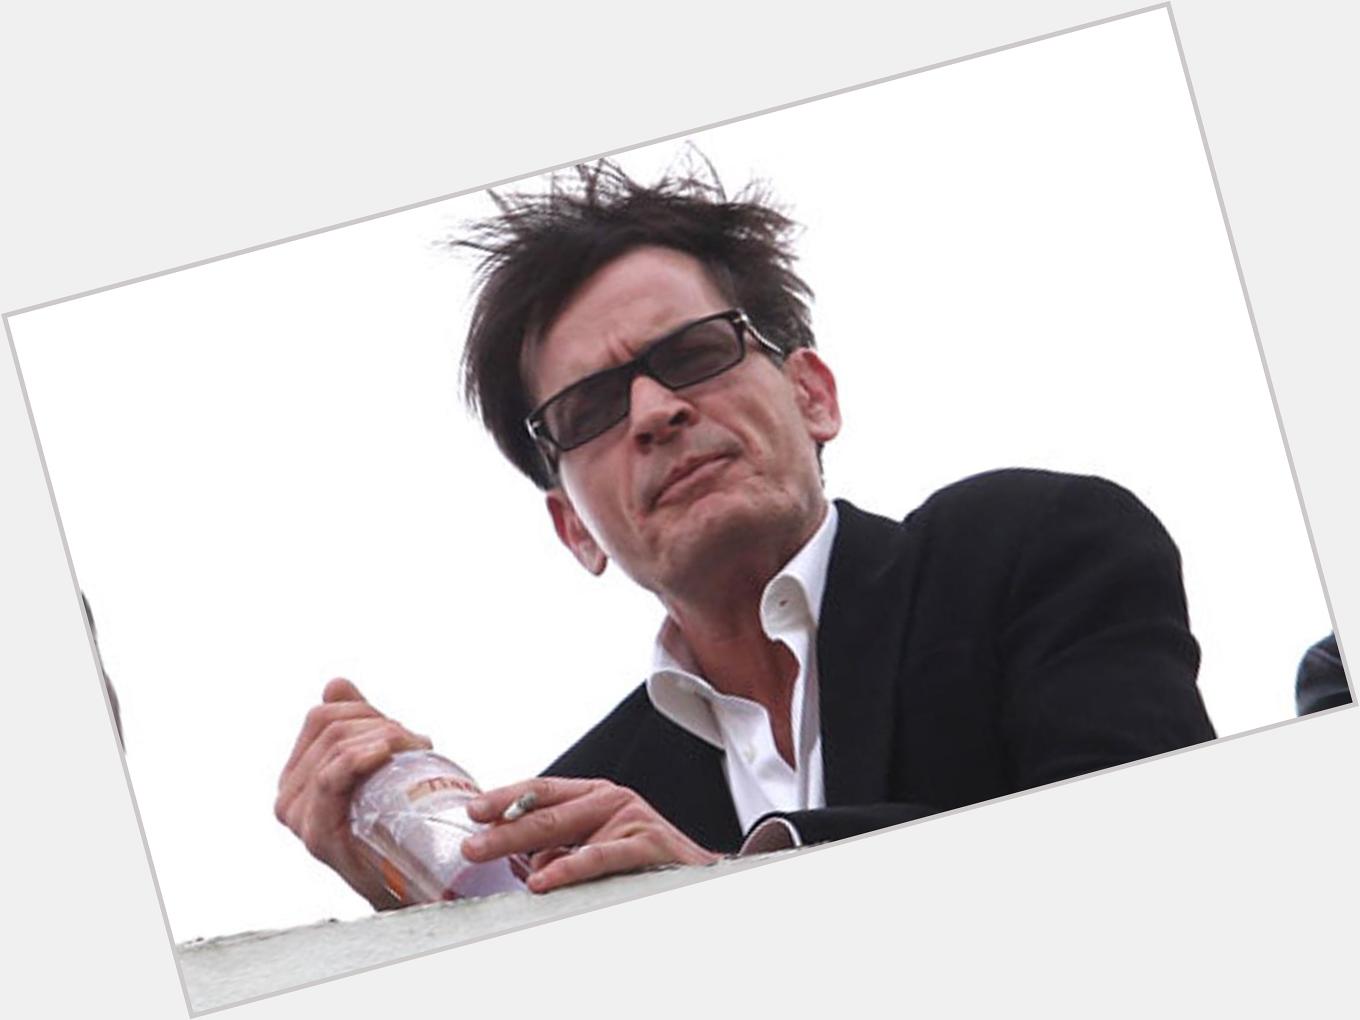 Happy Birthday Charlie Sheen ! 50 Years Young Today.

Always Been A Big Fan Of His Furniture Polish. 